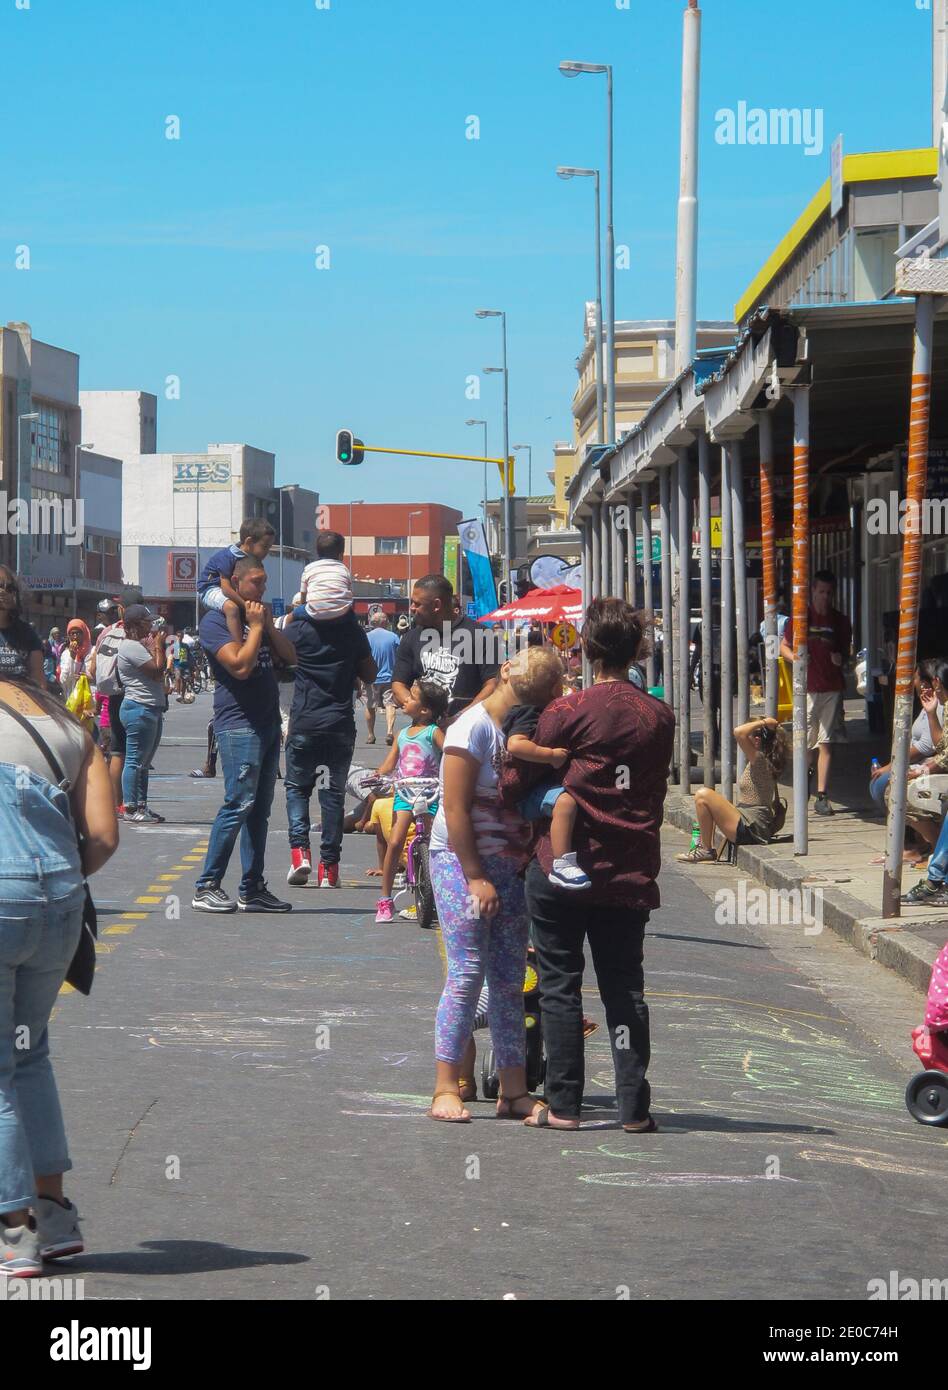 South African people in the street when roads are closed to traffic and used as a pedestrian zone during Summer concept authentic lifestyle Stock Photo